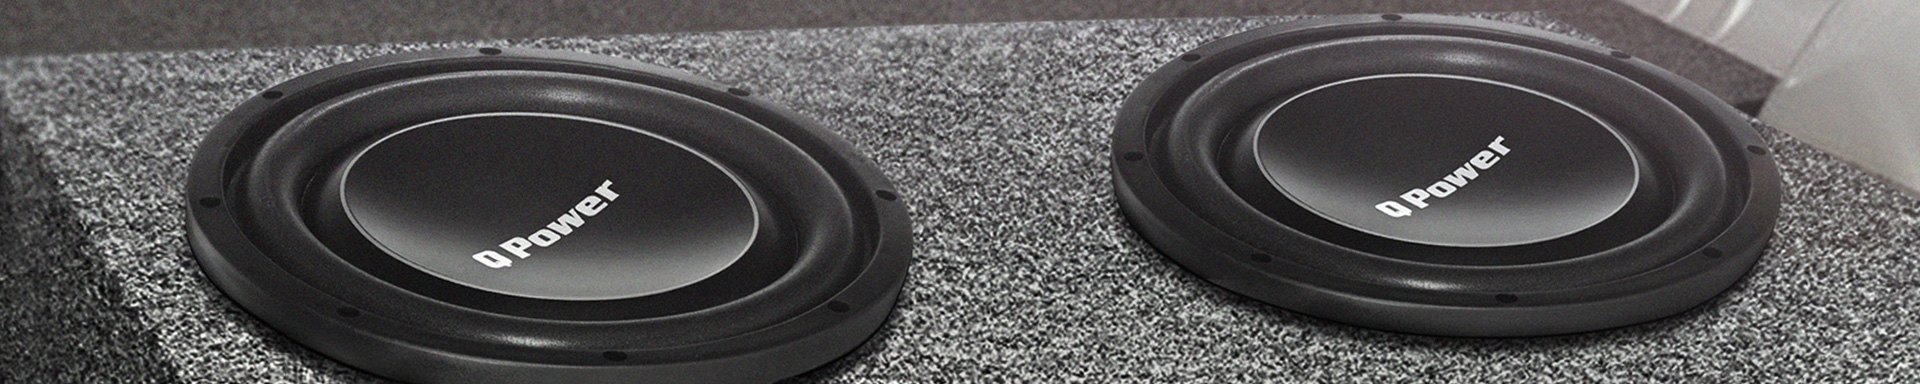 QPower Subwoofers